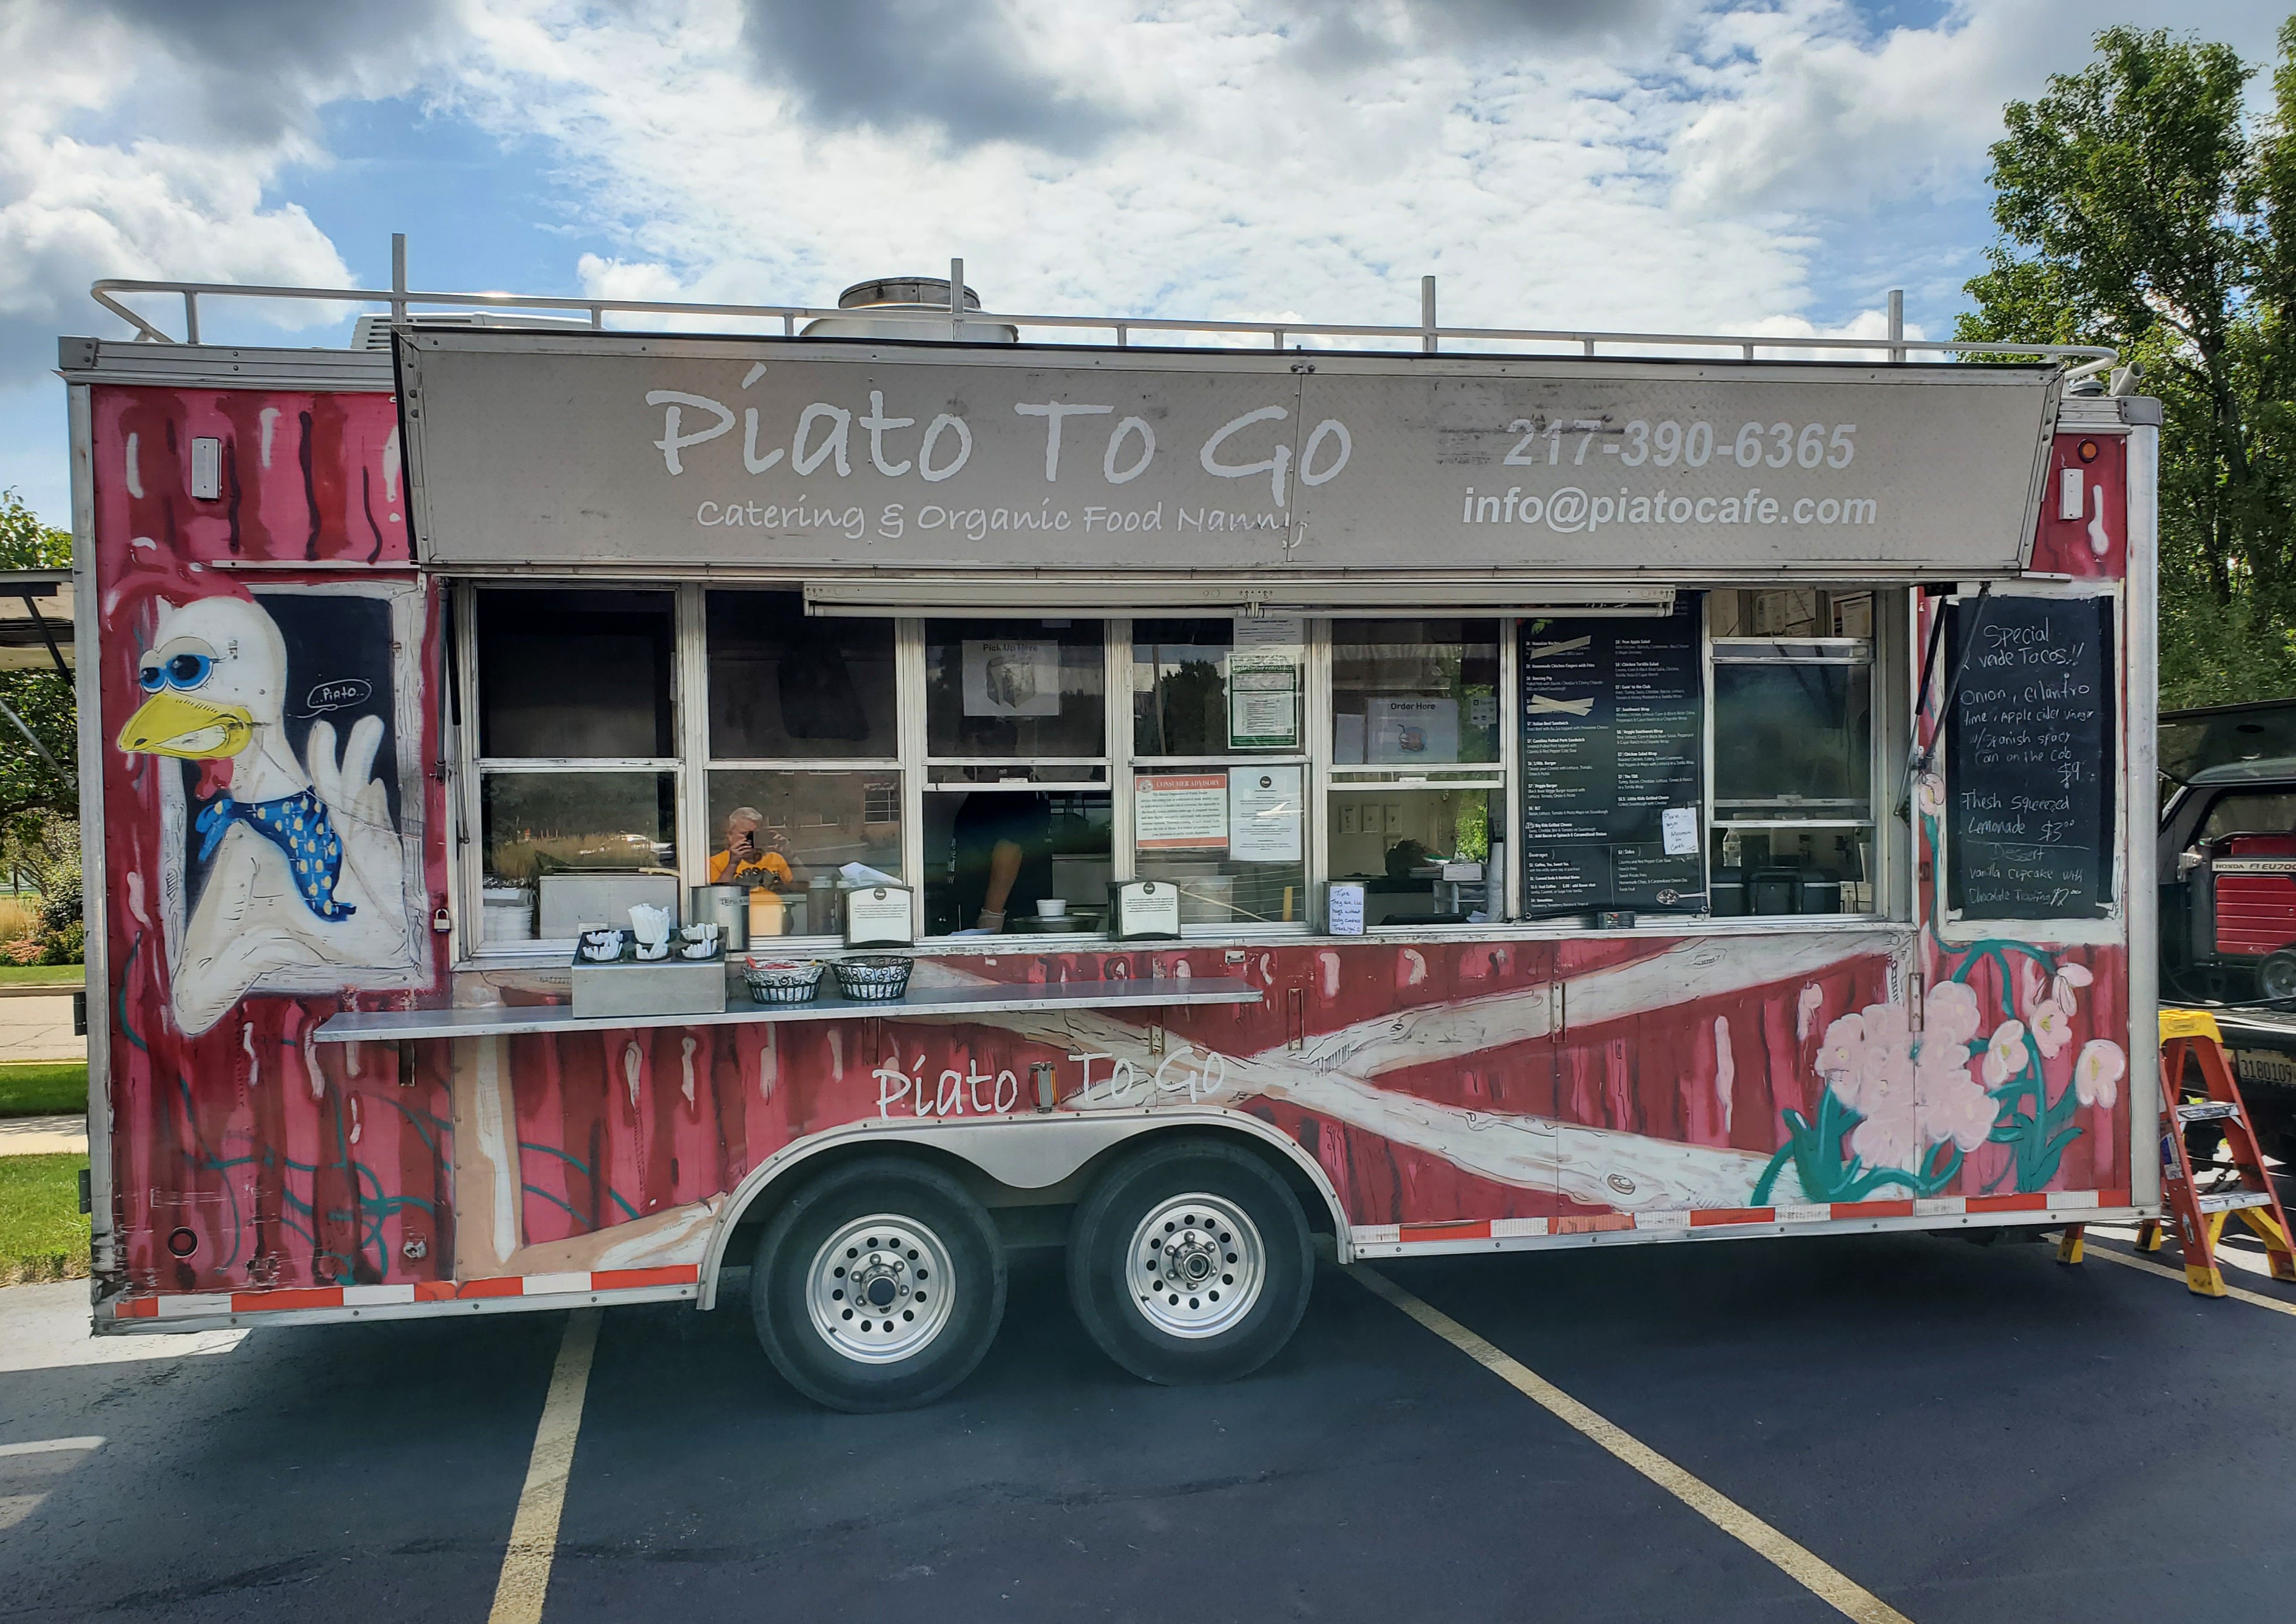 A red food truck with a chicken on the side giving a peace sign is for the Piato To Go Food Nanny. Top image by Carl Busch.